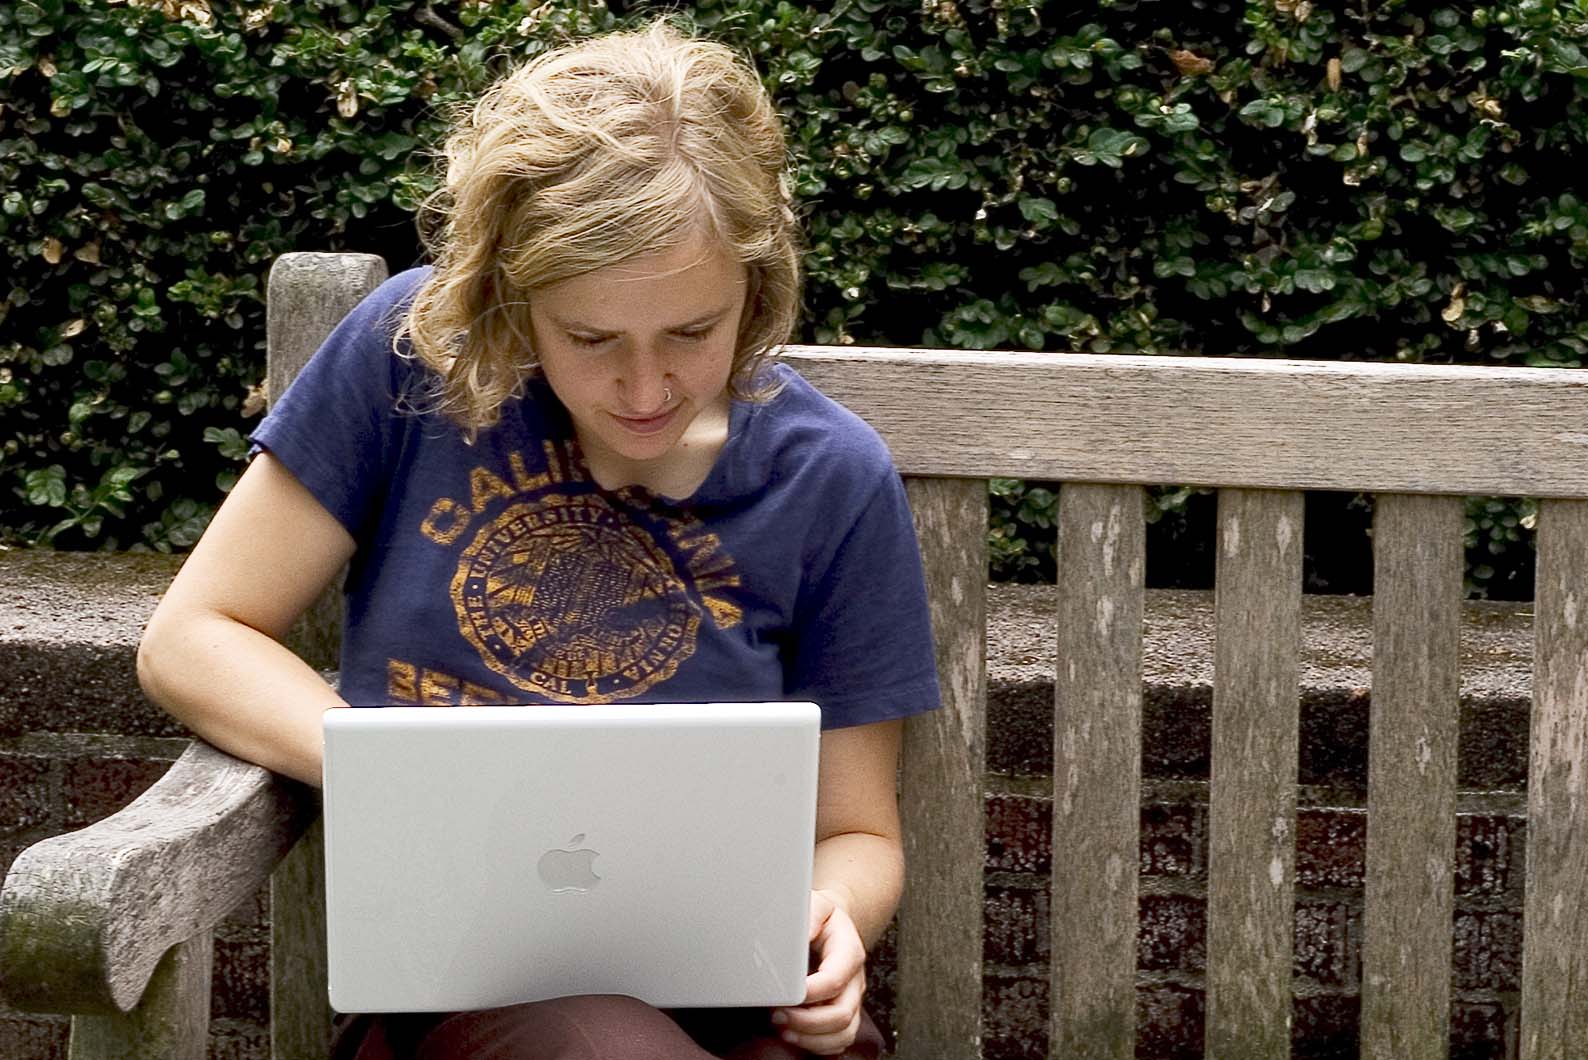 Person sitting on a bench using a labtop computer